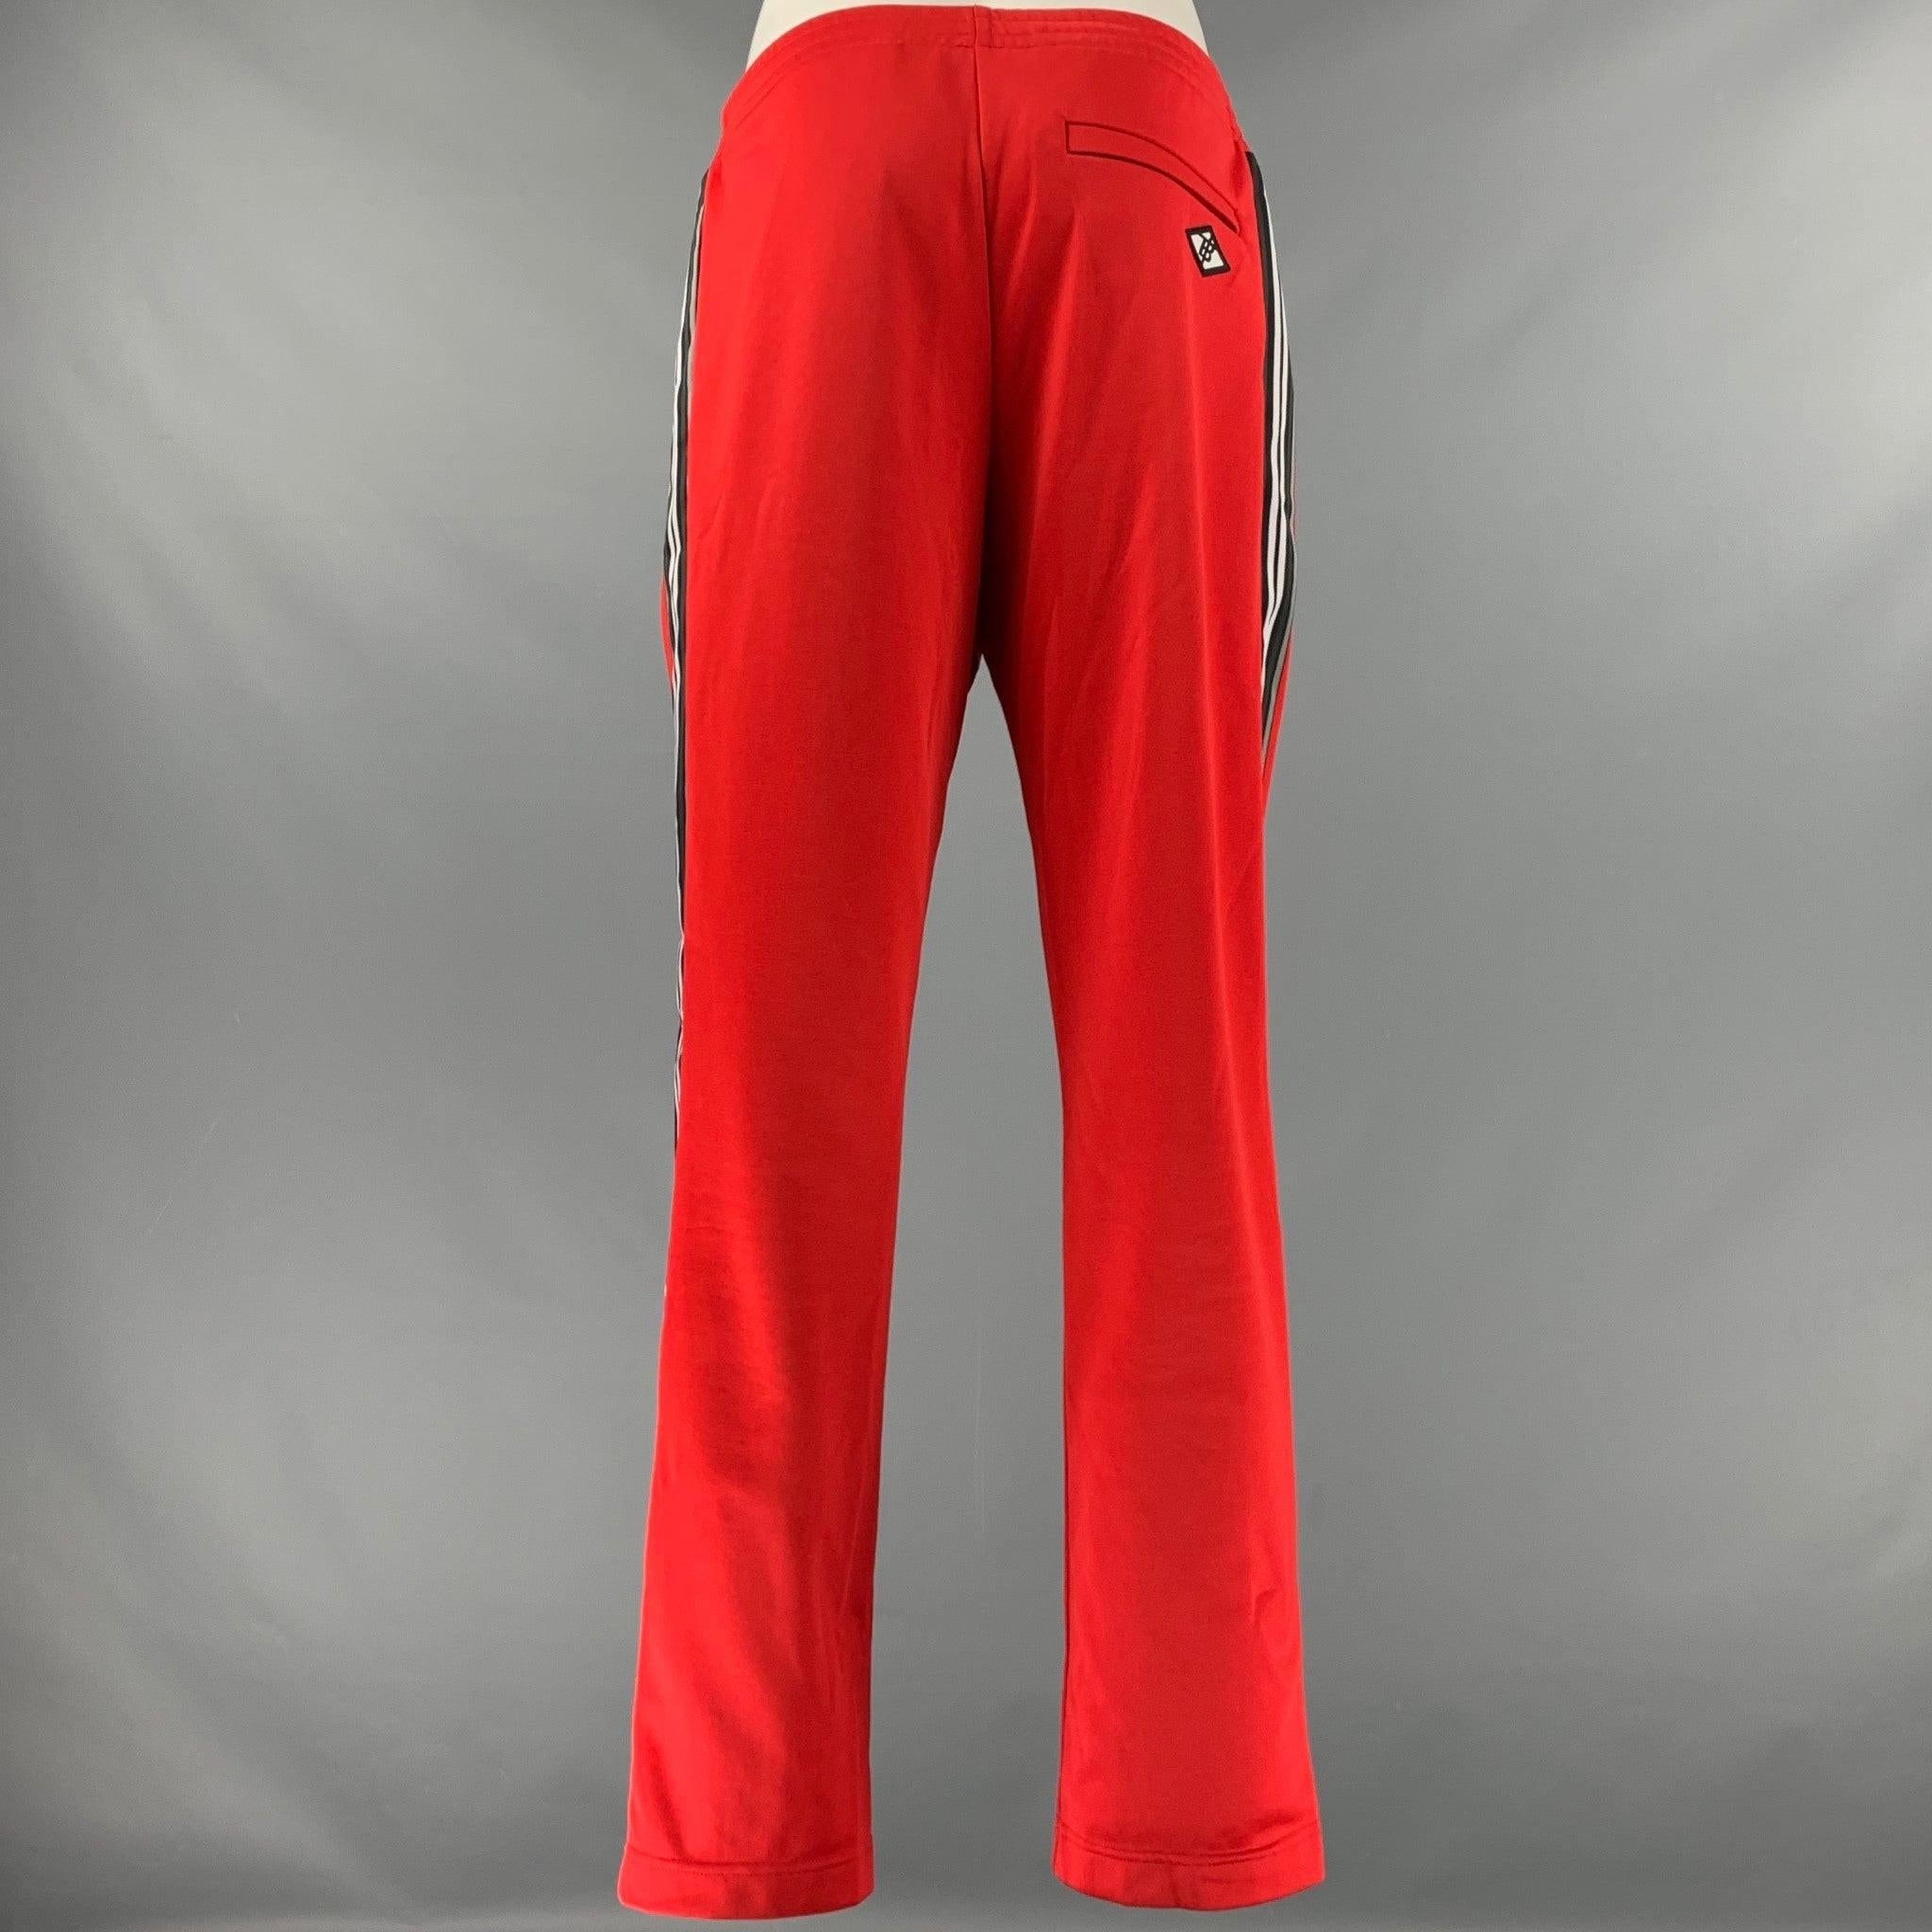 BURBERRY casual pants
in a
red polyester cotton blend fabric featuring exposed white faux pants layer, stripes down sides, and an elastic waistband. Made in Italy.Good Pre-Owned Condition. Moderate marks. 

Marked:   US 10 

Measurements: 
  Waist: